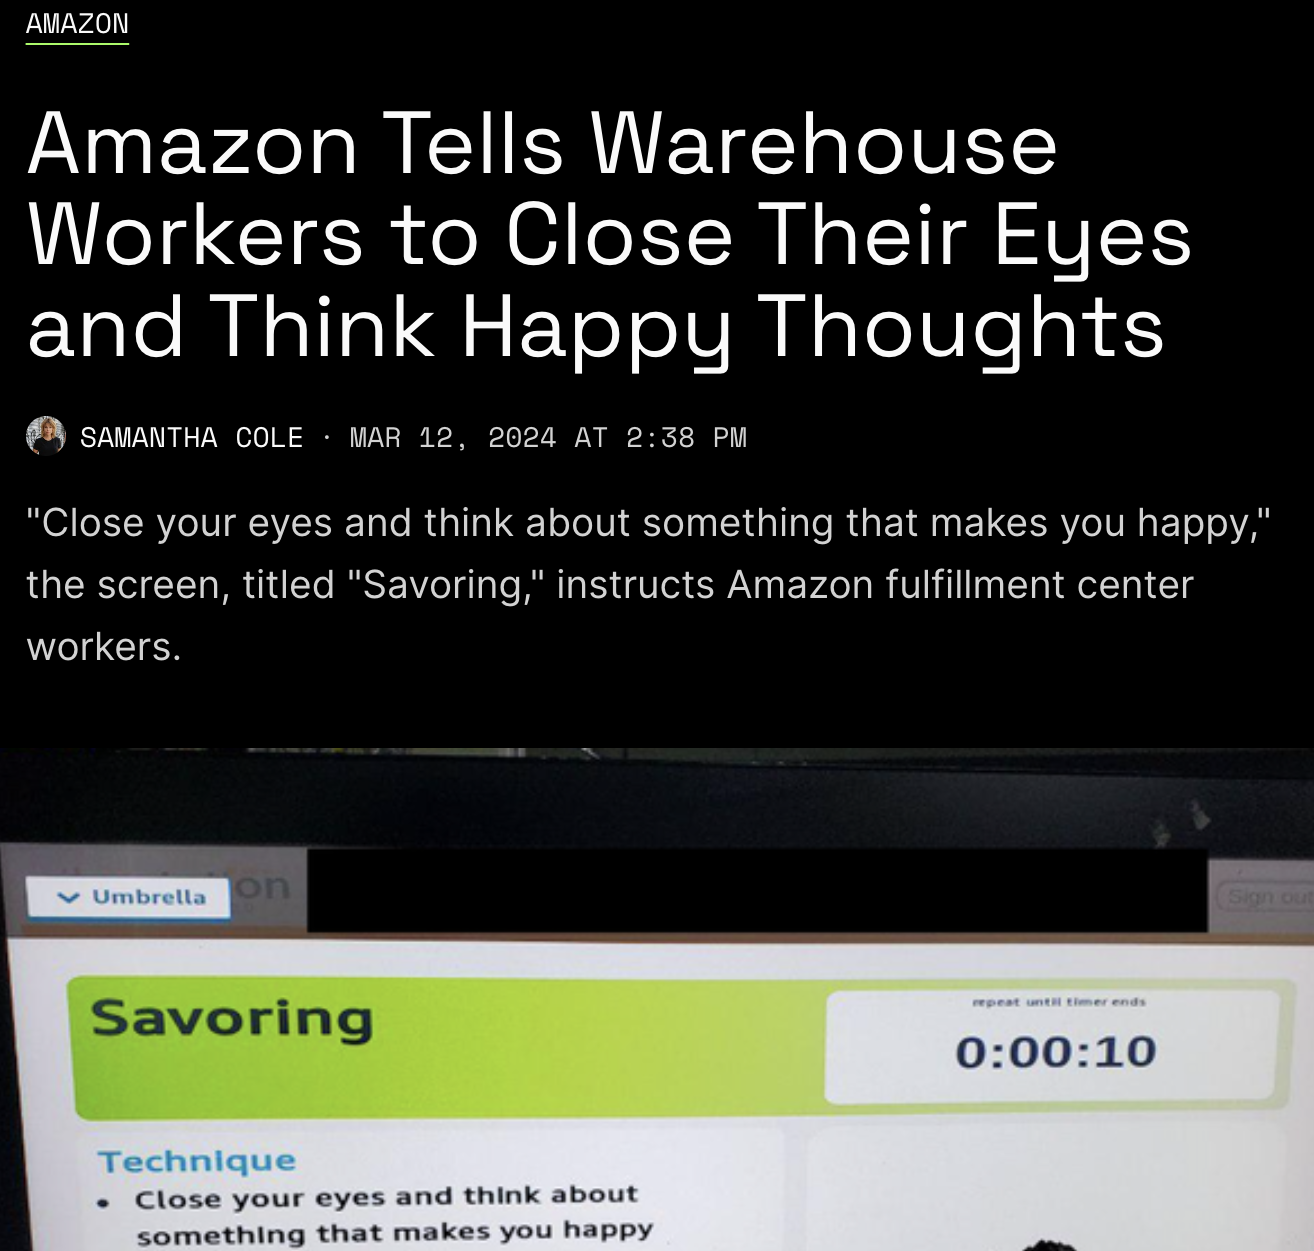 software - Amazon Amazon Tells Warehouse Workers to Close Their Eyes and Think Happy Thoughts Samantha Cole At "Close your eyes and think about something that makes you happy," the screen, titled "Savoring," instructs Amazon fulfillment center workers. Um